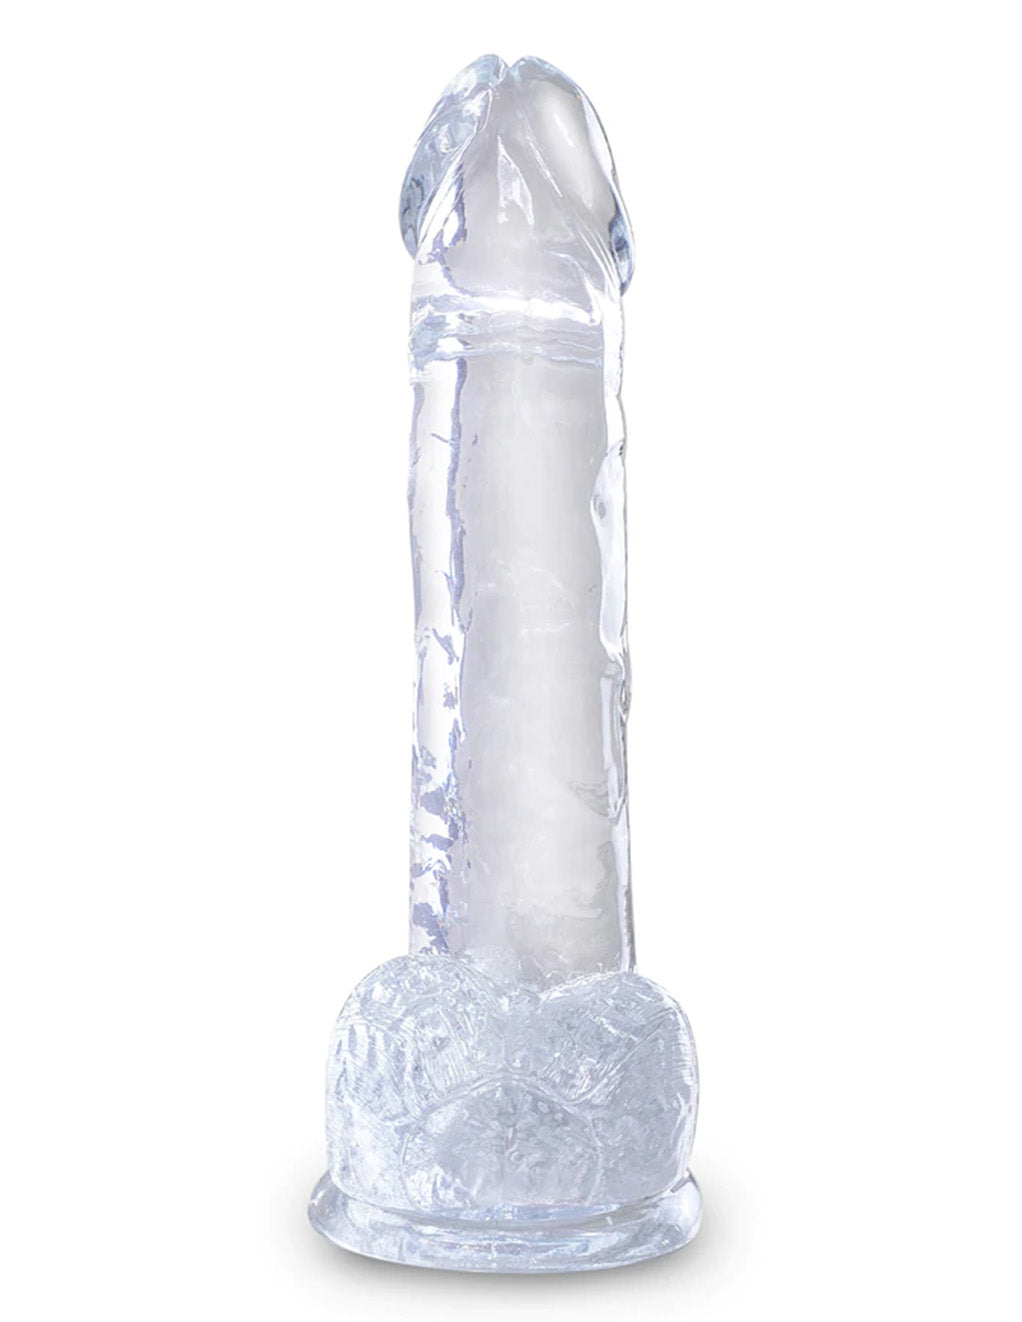 King Cock 7 Inch Suction Cup Dildo with Balls- Underside